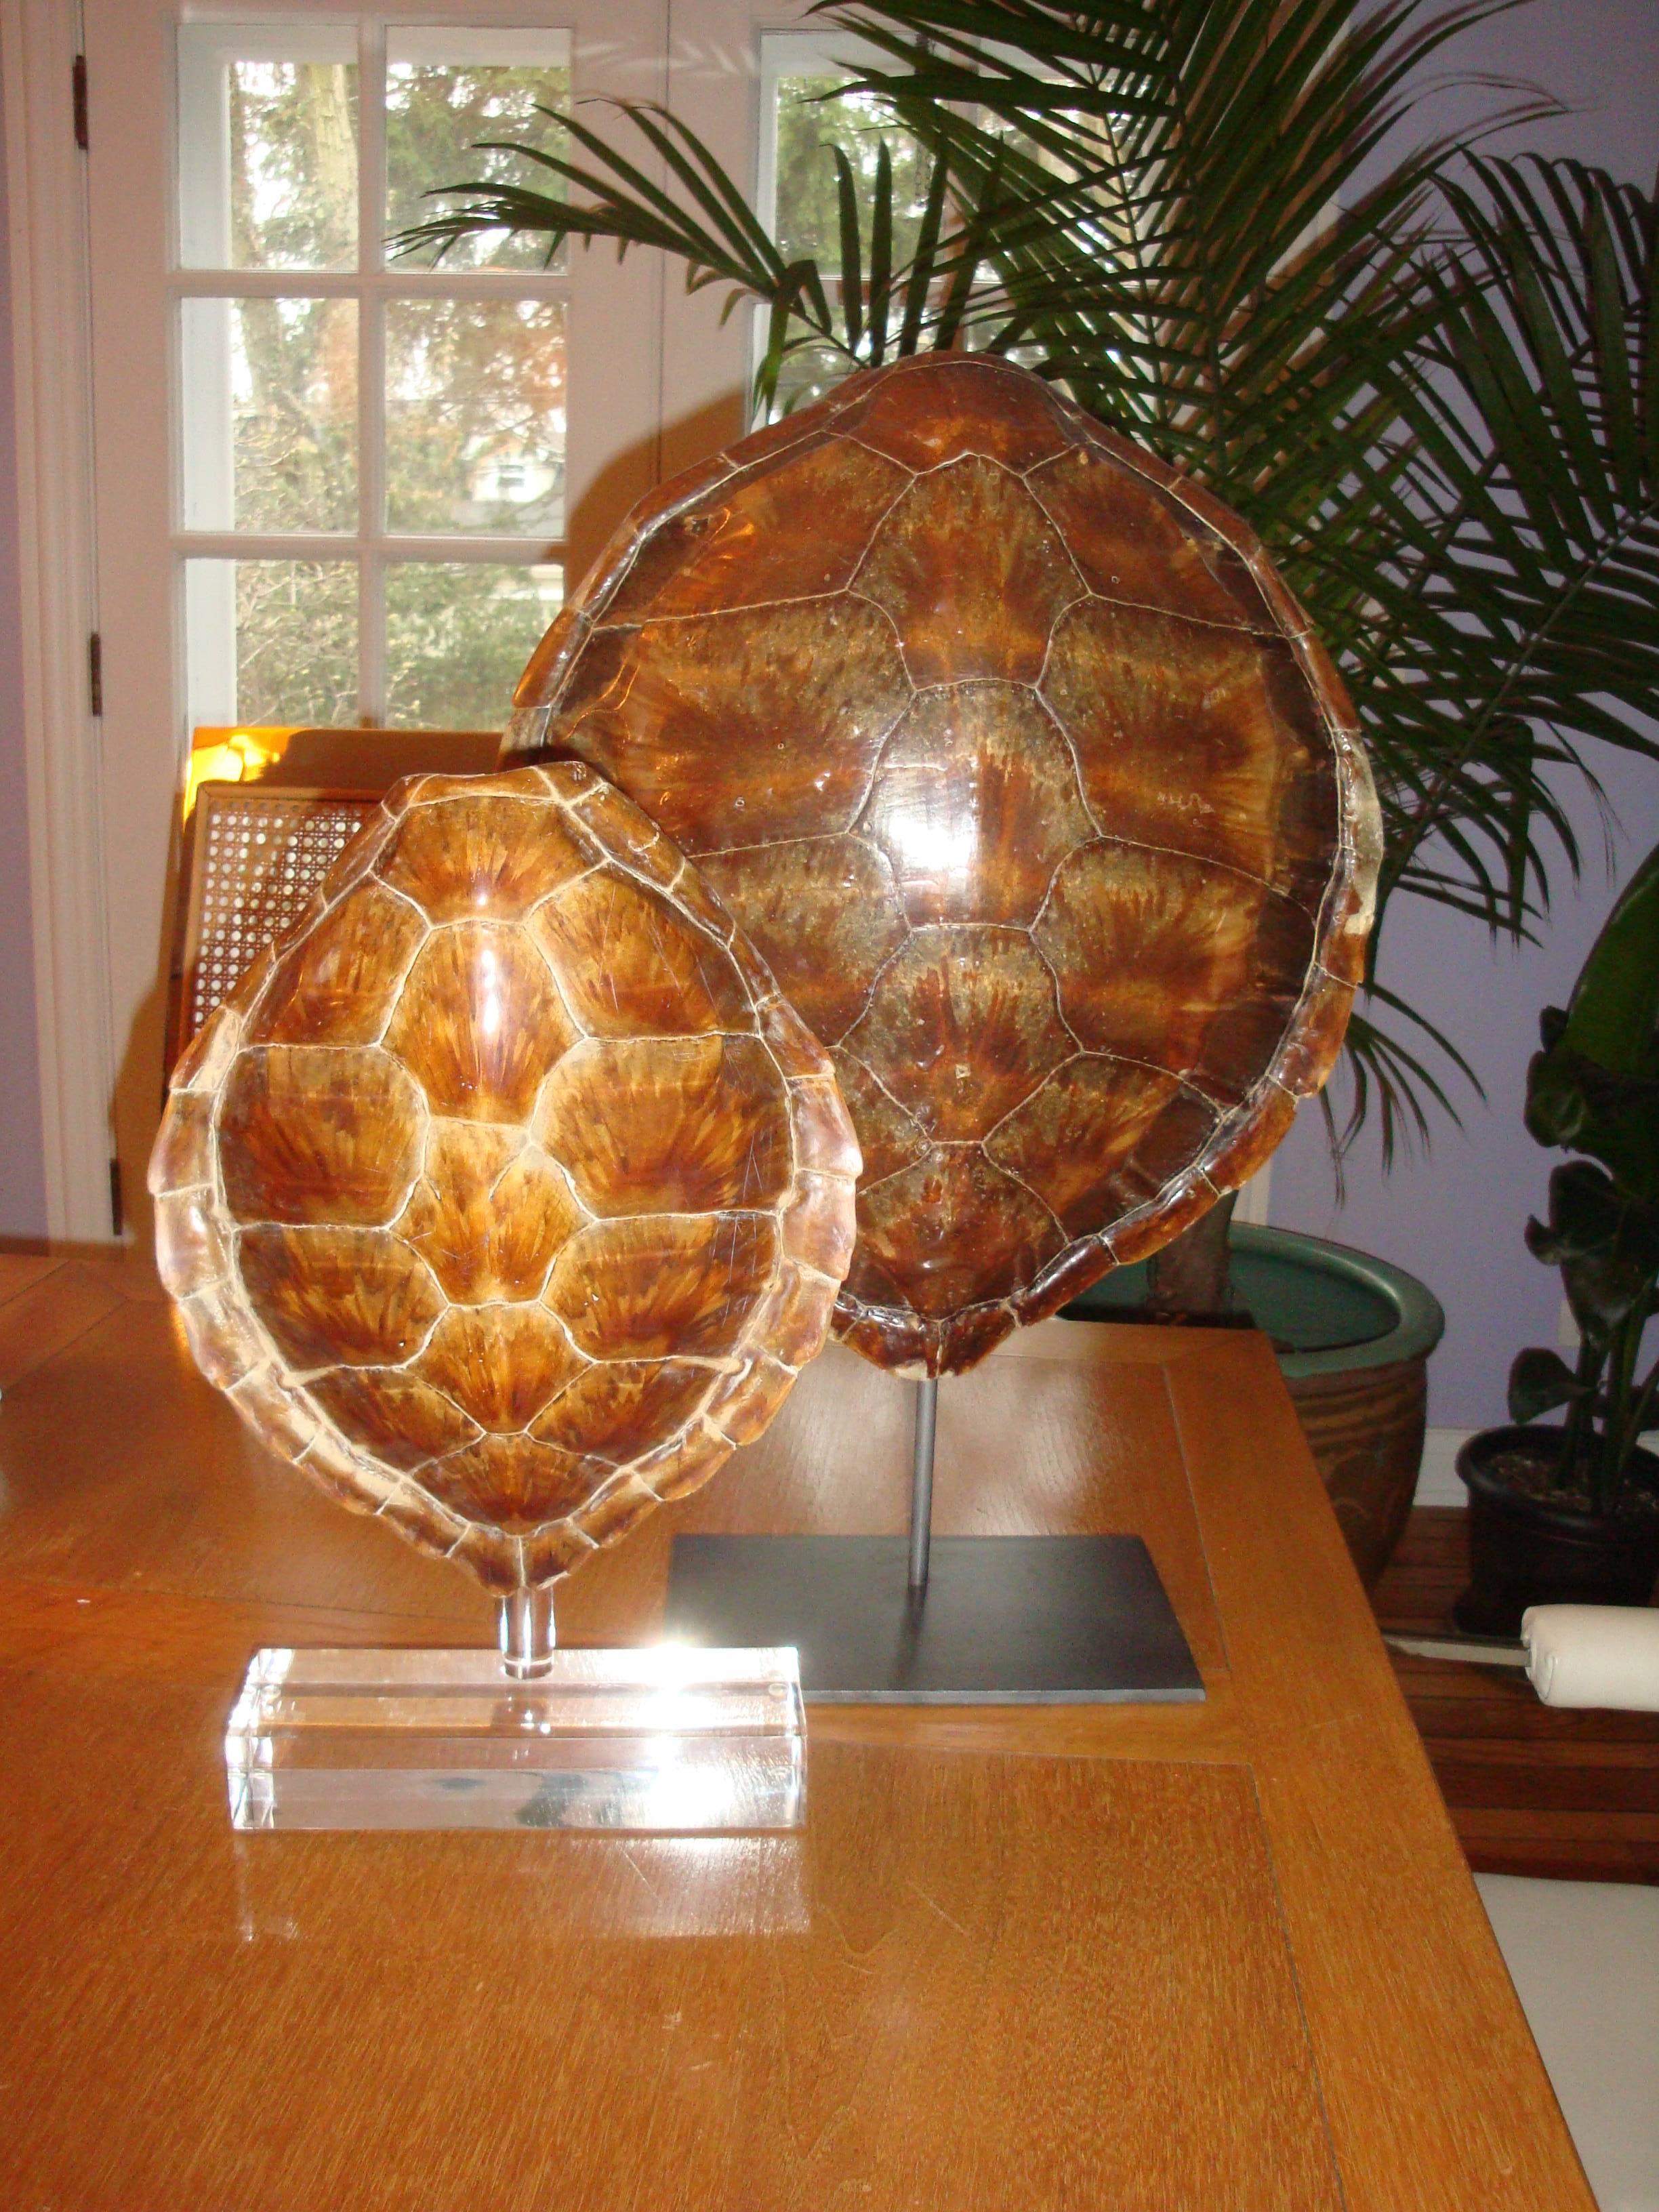 This is a pair of antique sea turtles of different sizes on Lucite and metal stands.